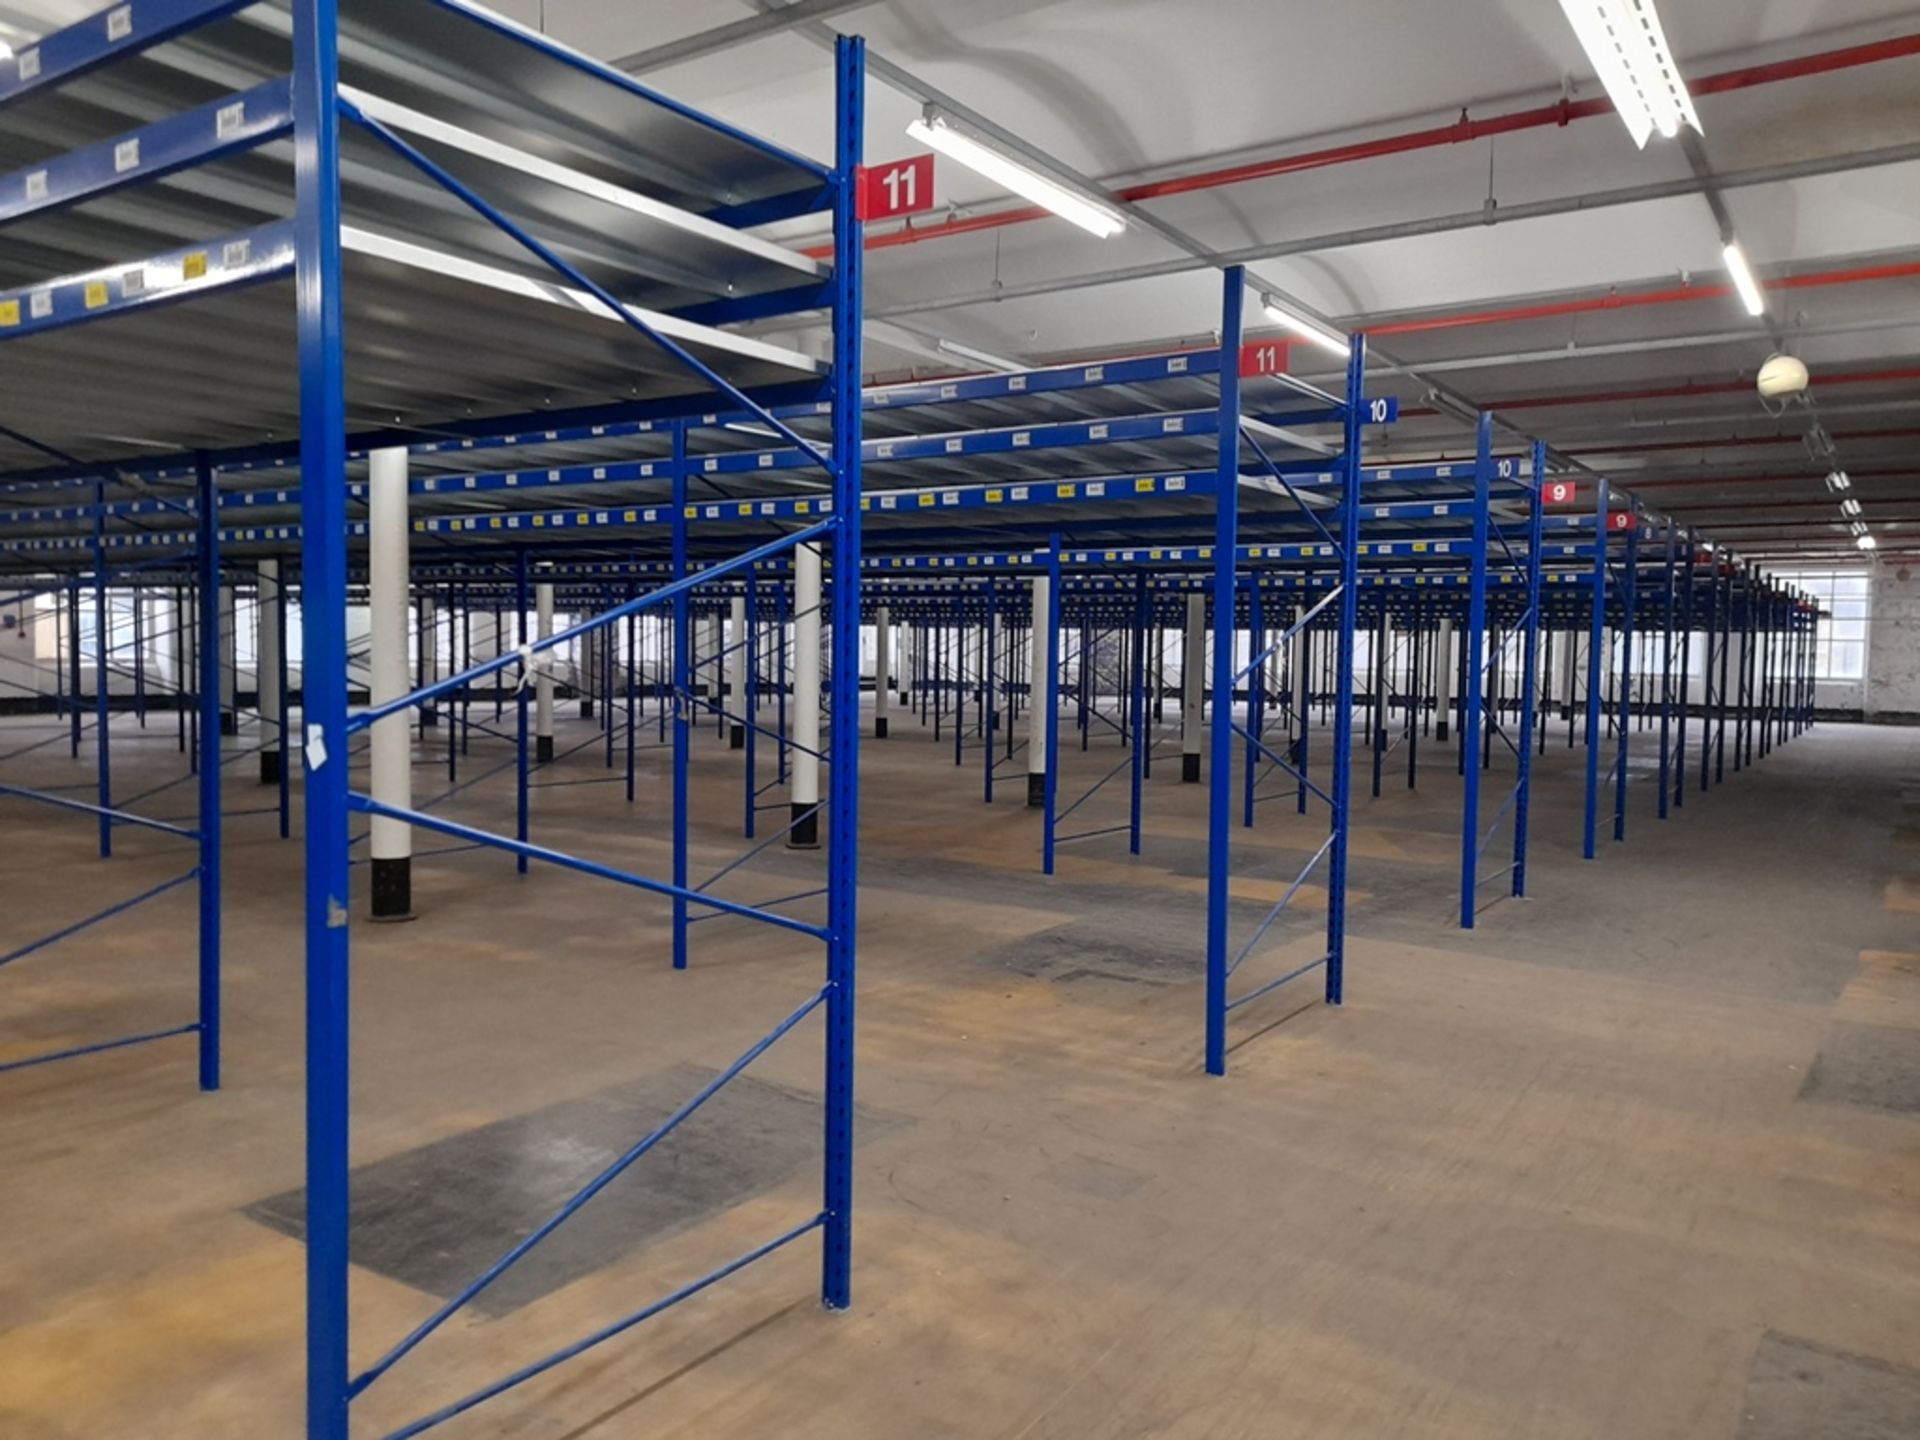 Static pallet racking - 193 bays, each with 3 pairs of beams and 24 metal shelf partitions(Beam - Image 11 of 13